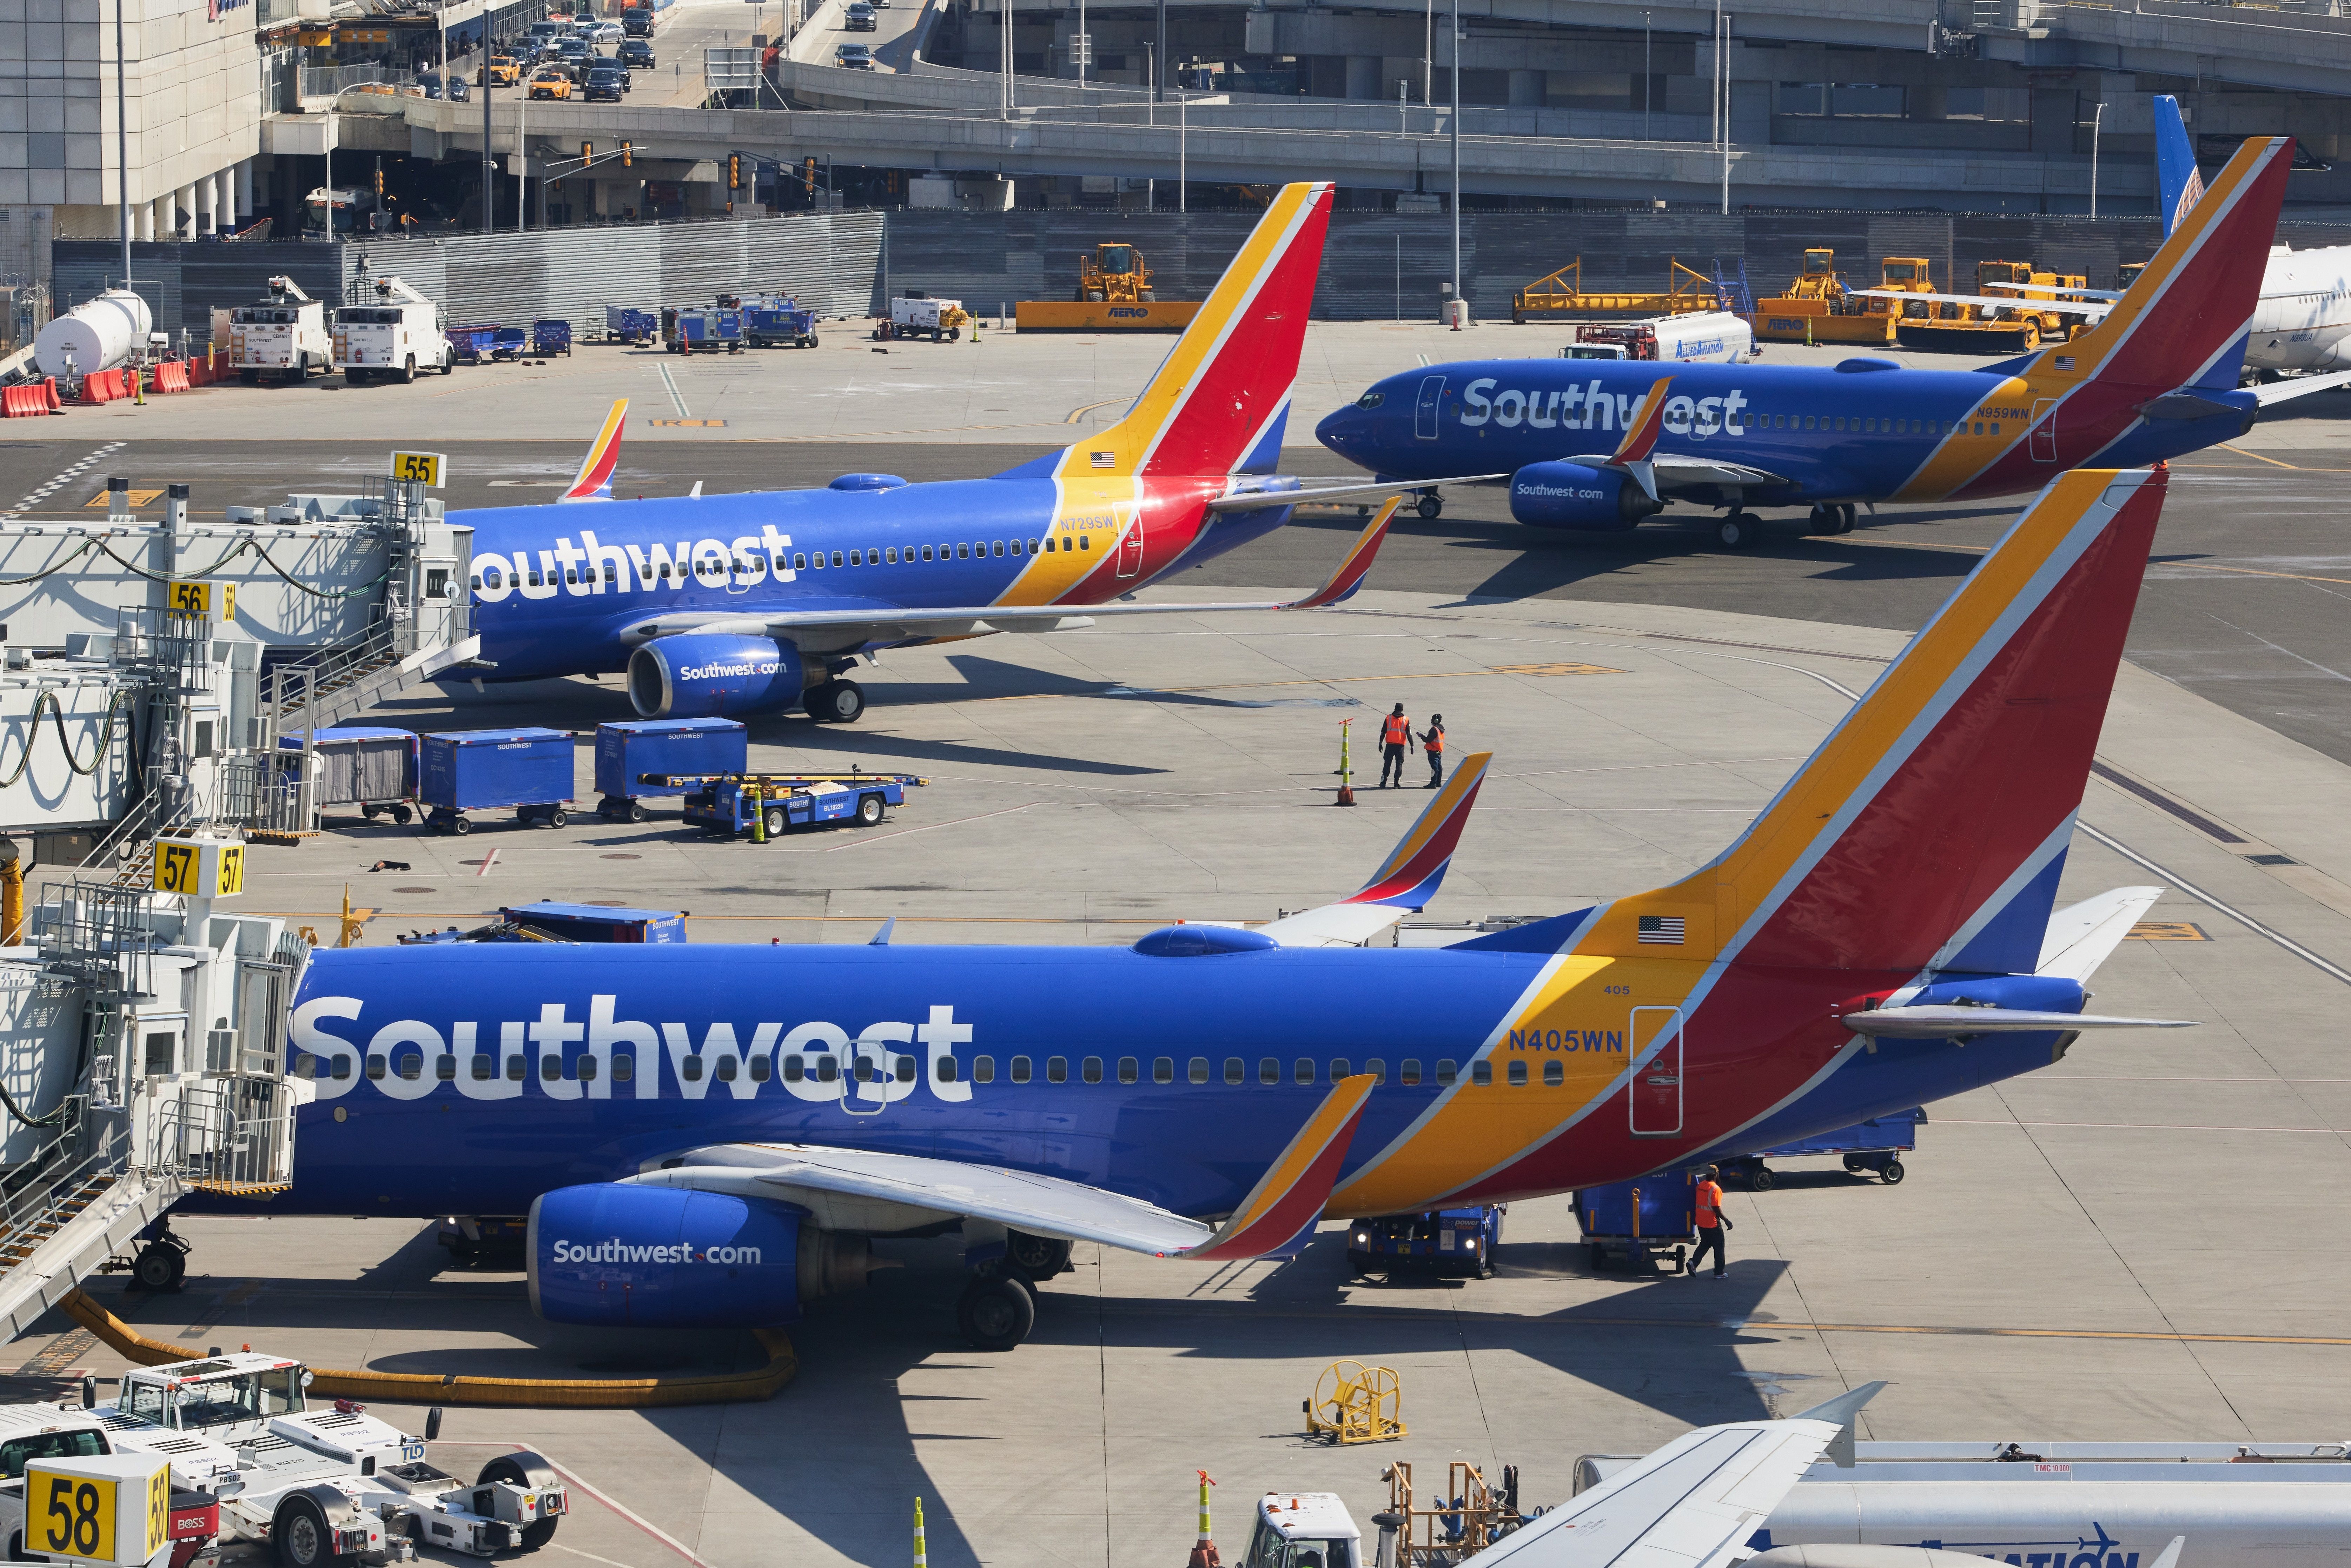 Several Southwest Boeing 737s on an airport apron.